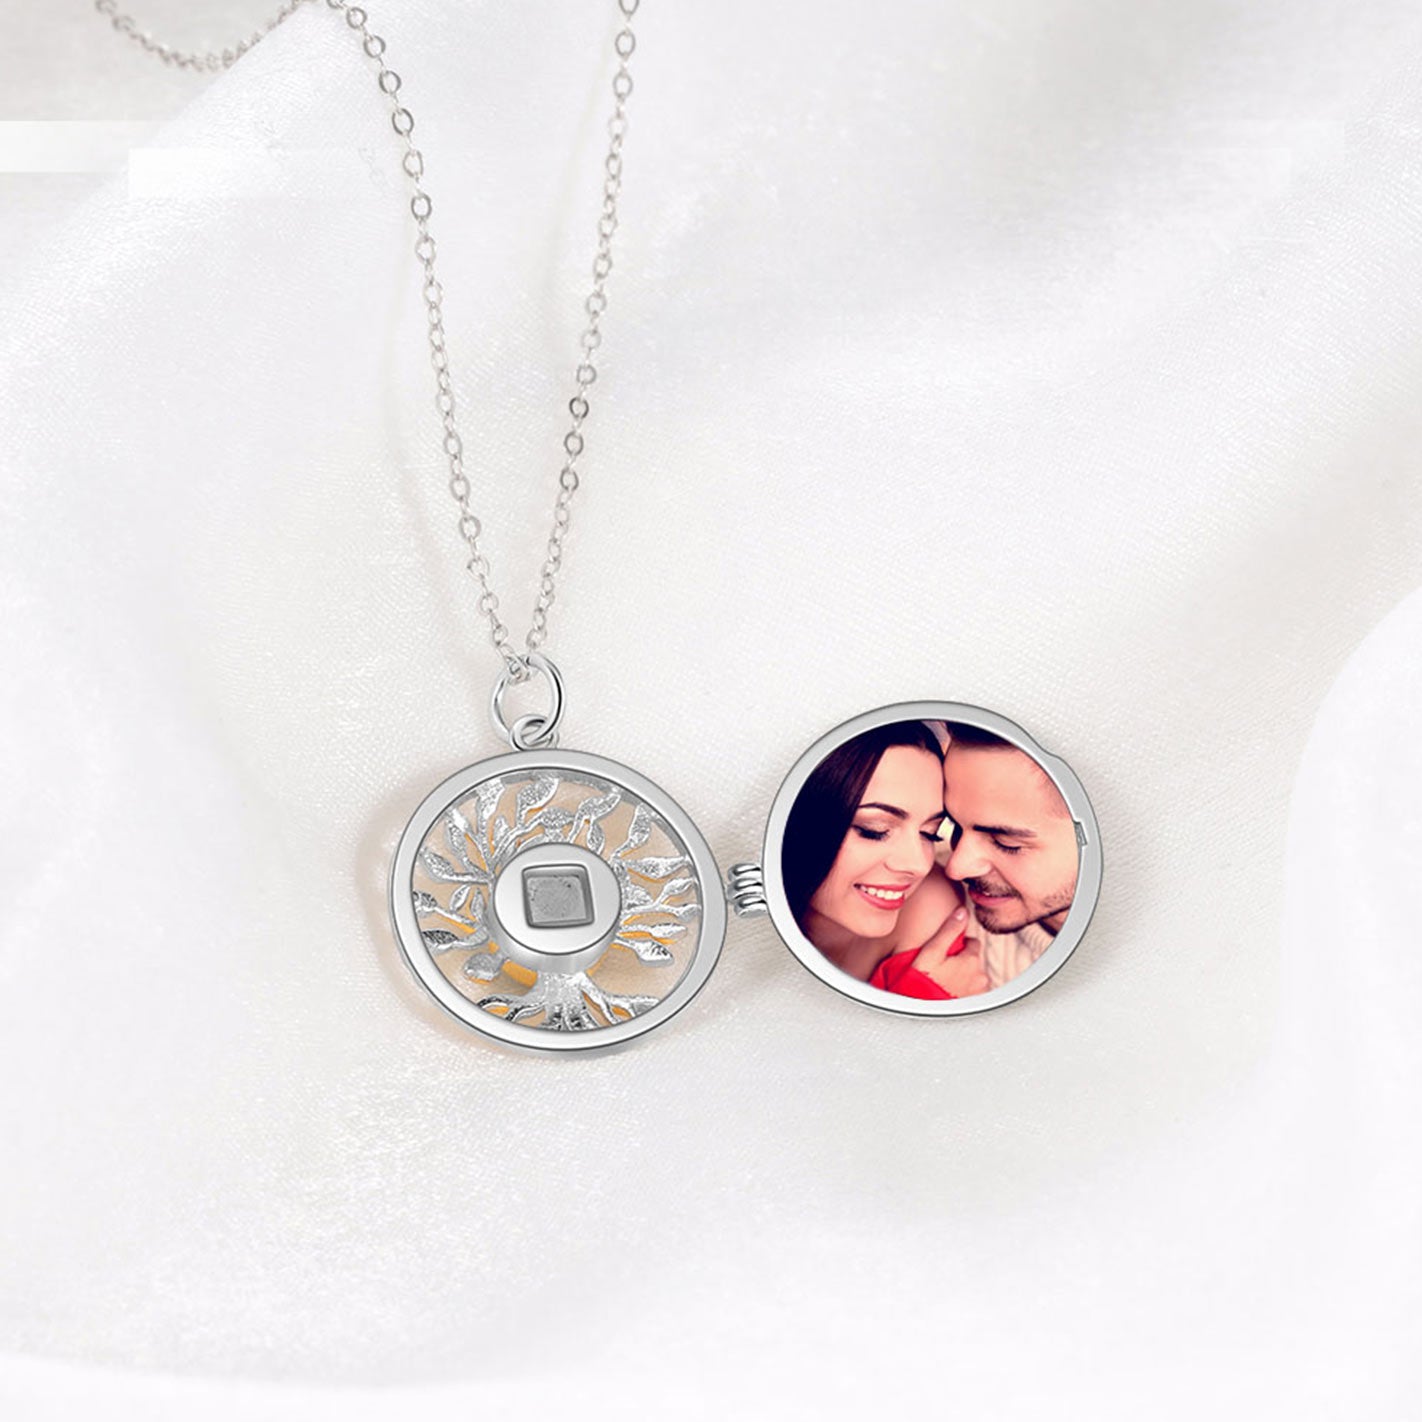 Personalised I Love You in 100 Languages Round Photo Projection Necklace with Engraving